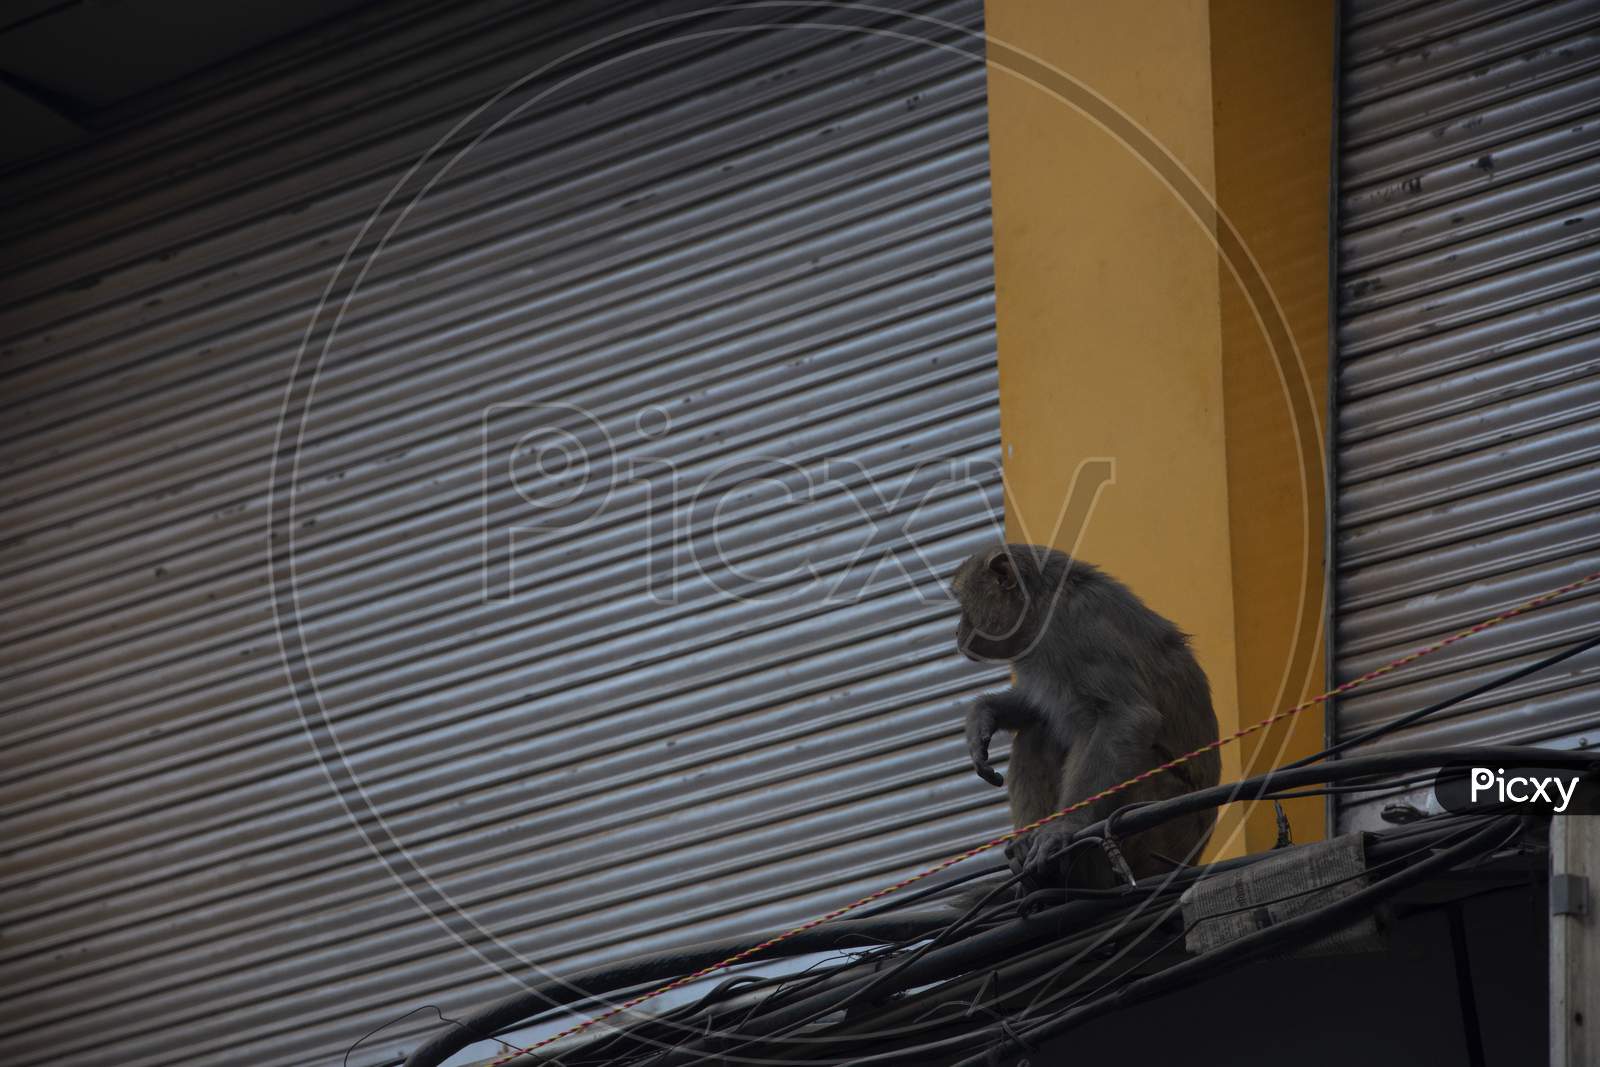 Monkeys On The Streets And Roofs Of Varanasi, India.